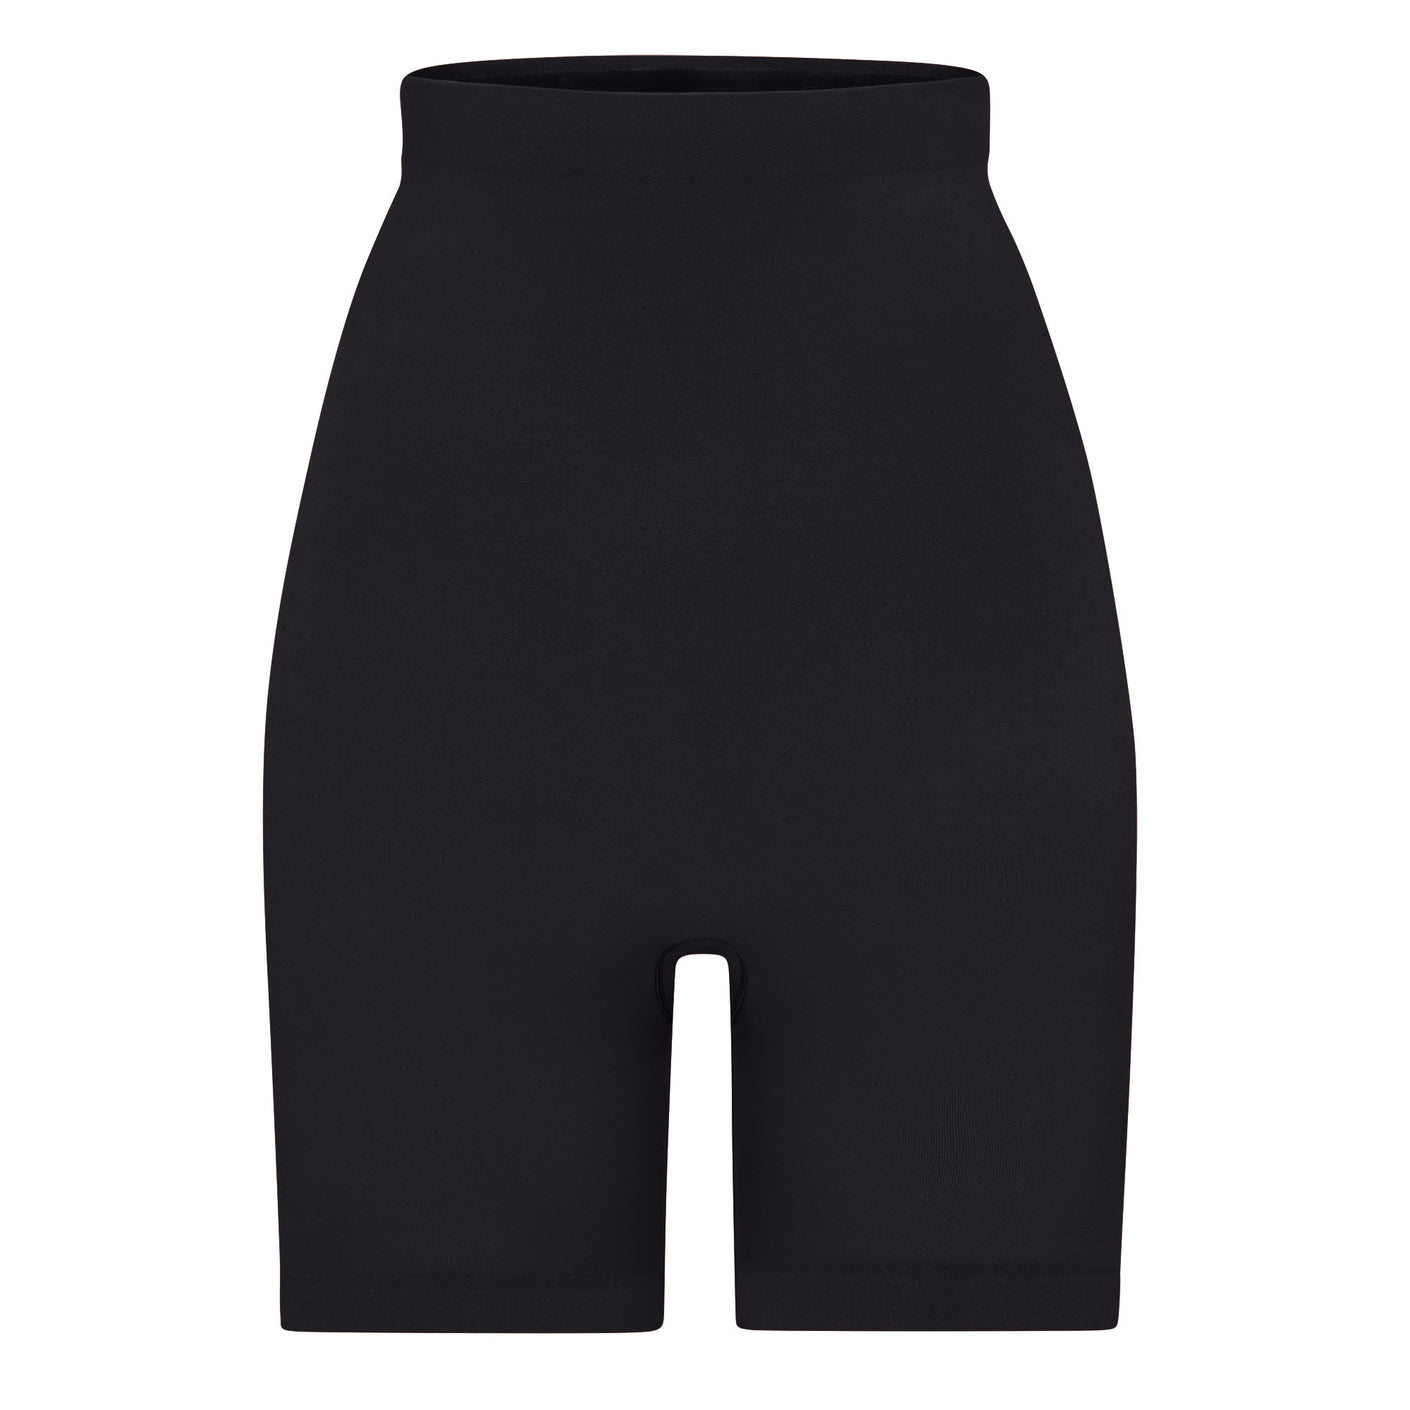 Buy Seamless Firm Tummy Control Shaping Shorts from Next